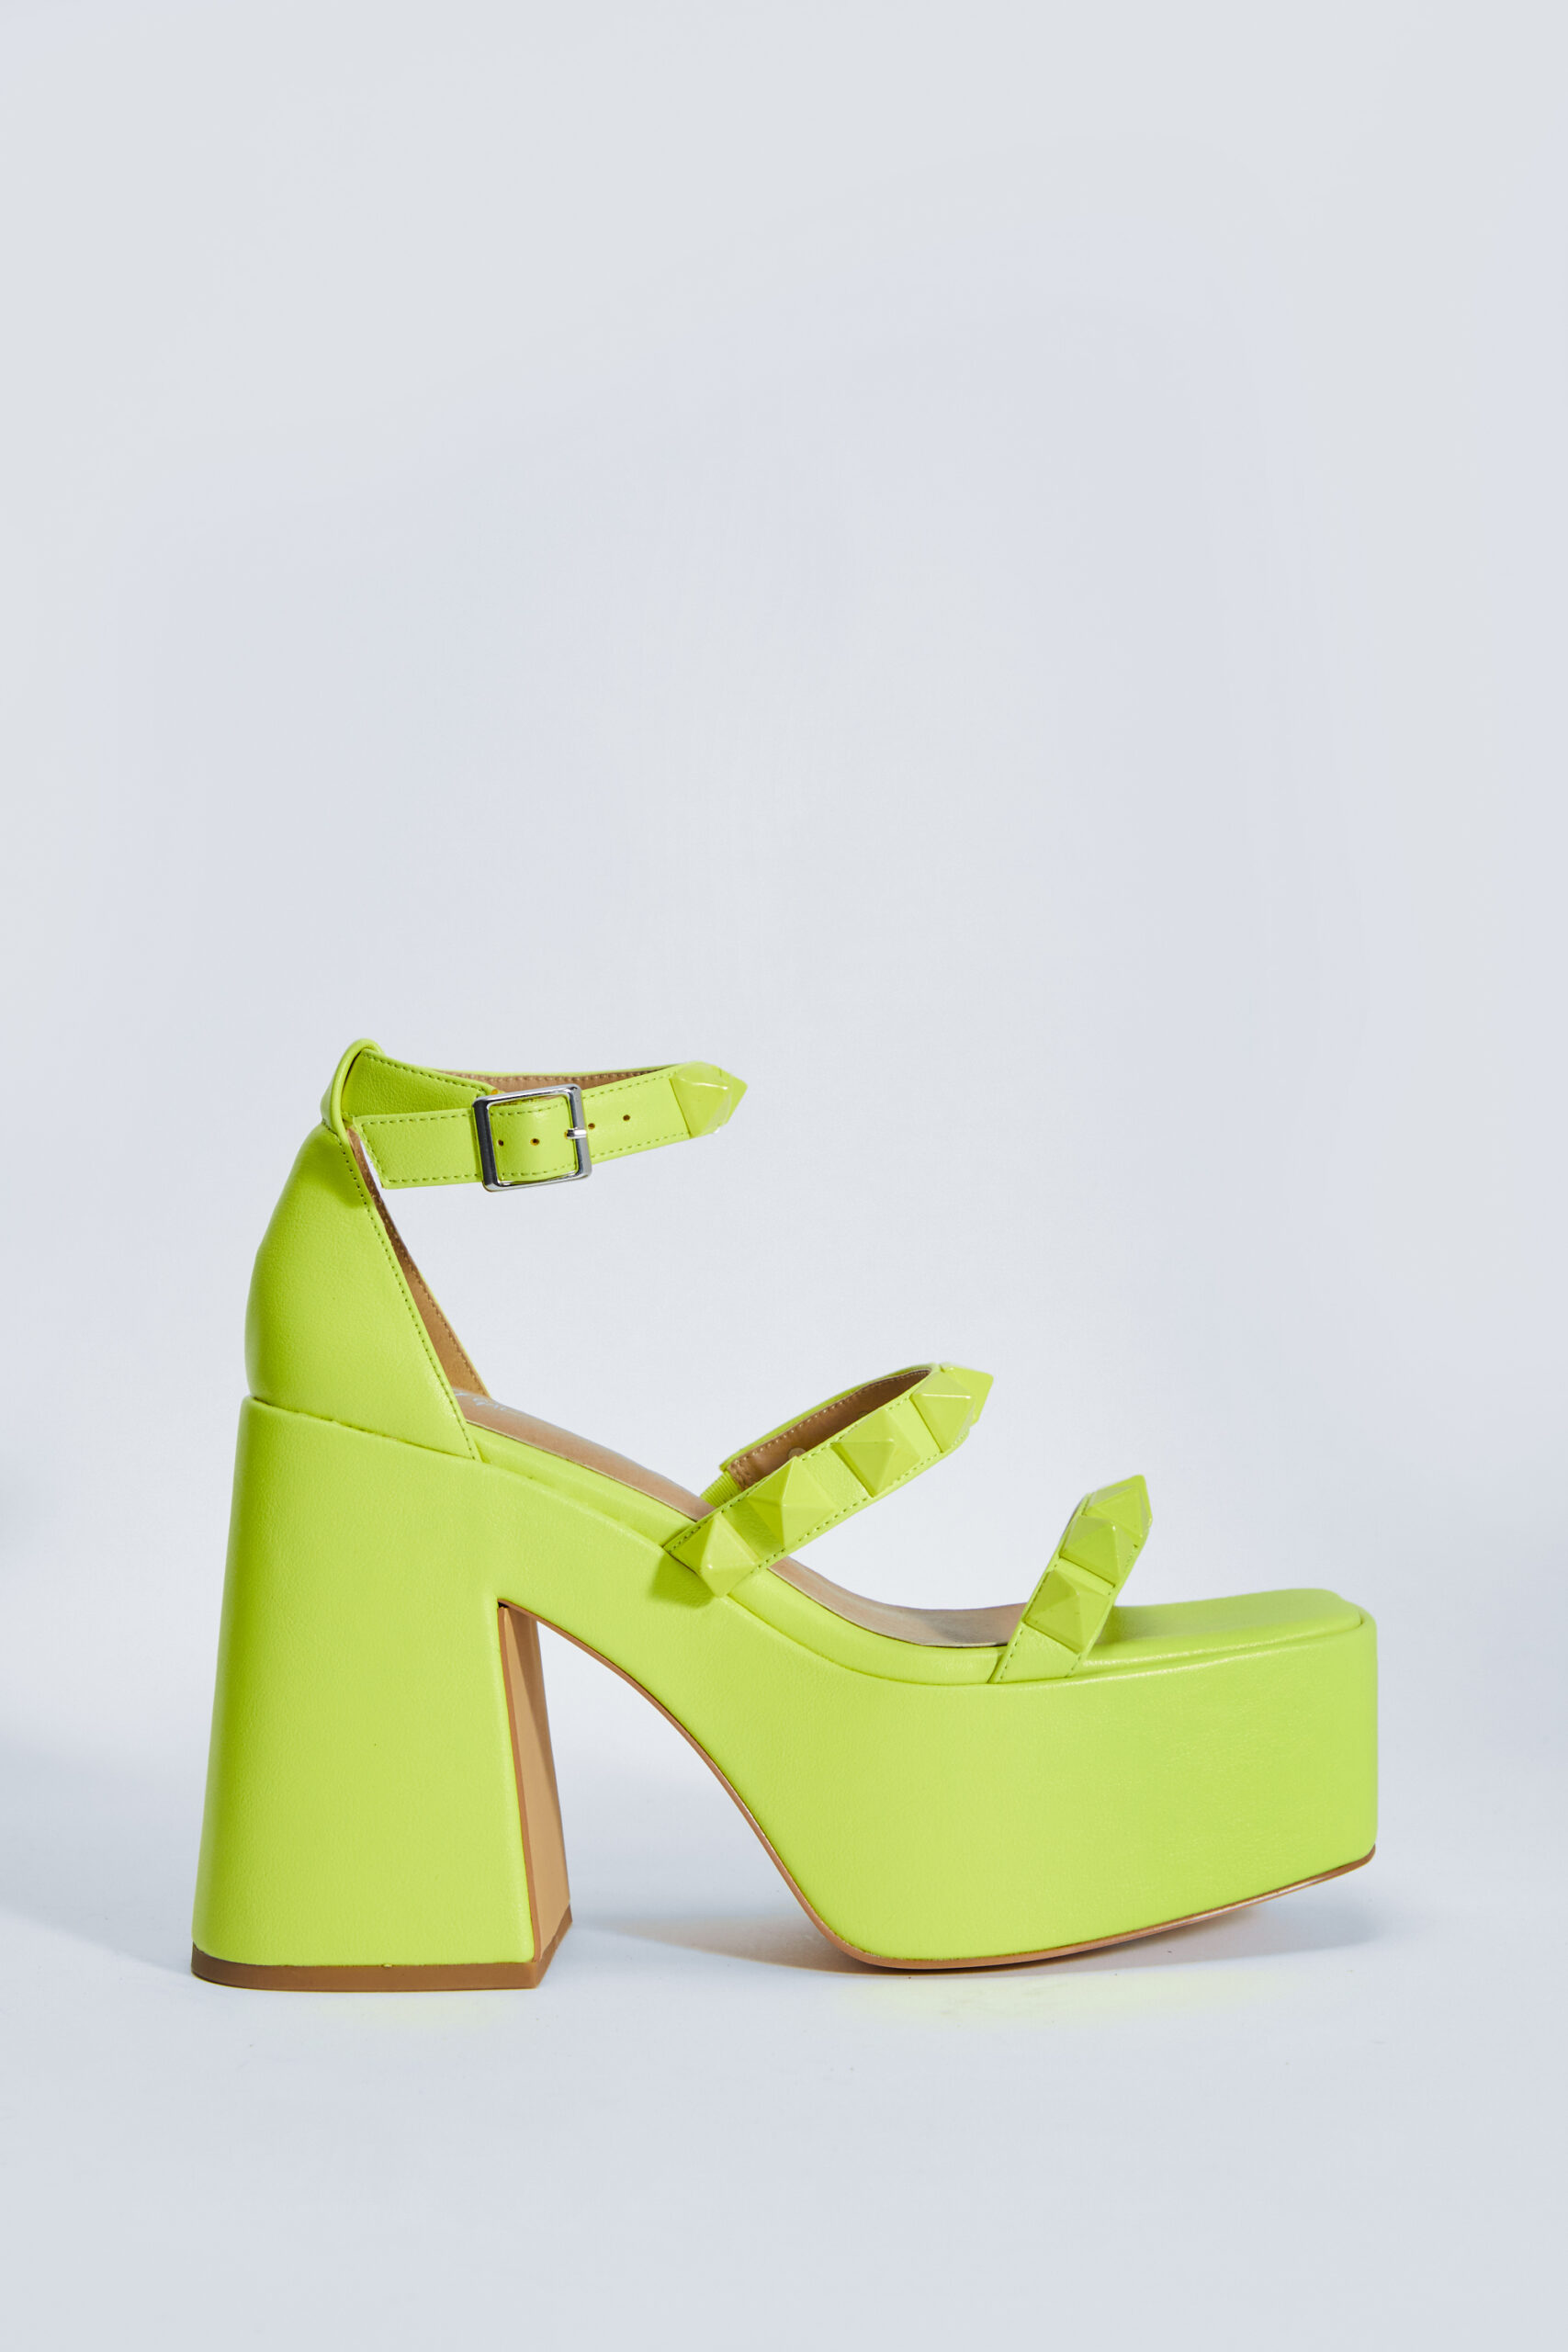 Metro Shoes launches the new NEON COLLECTION | APN News